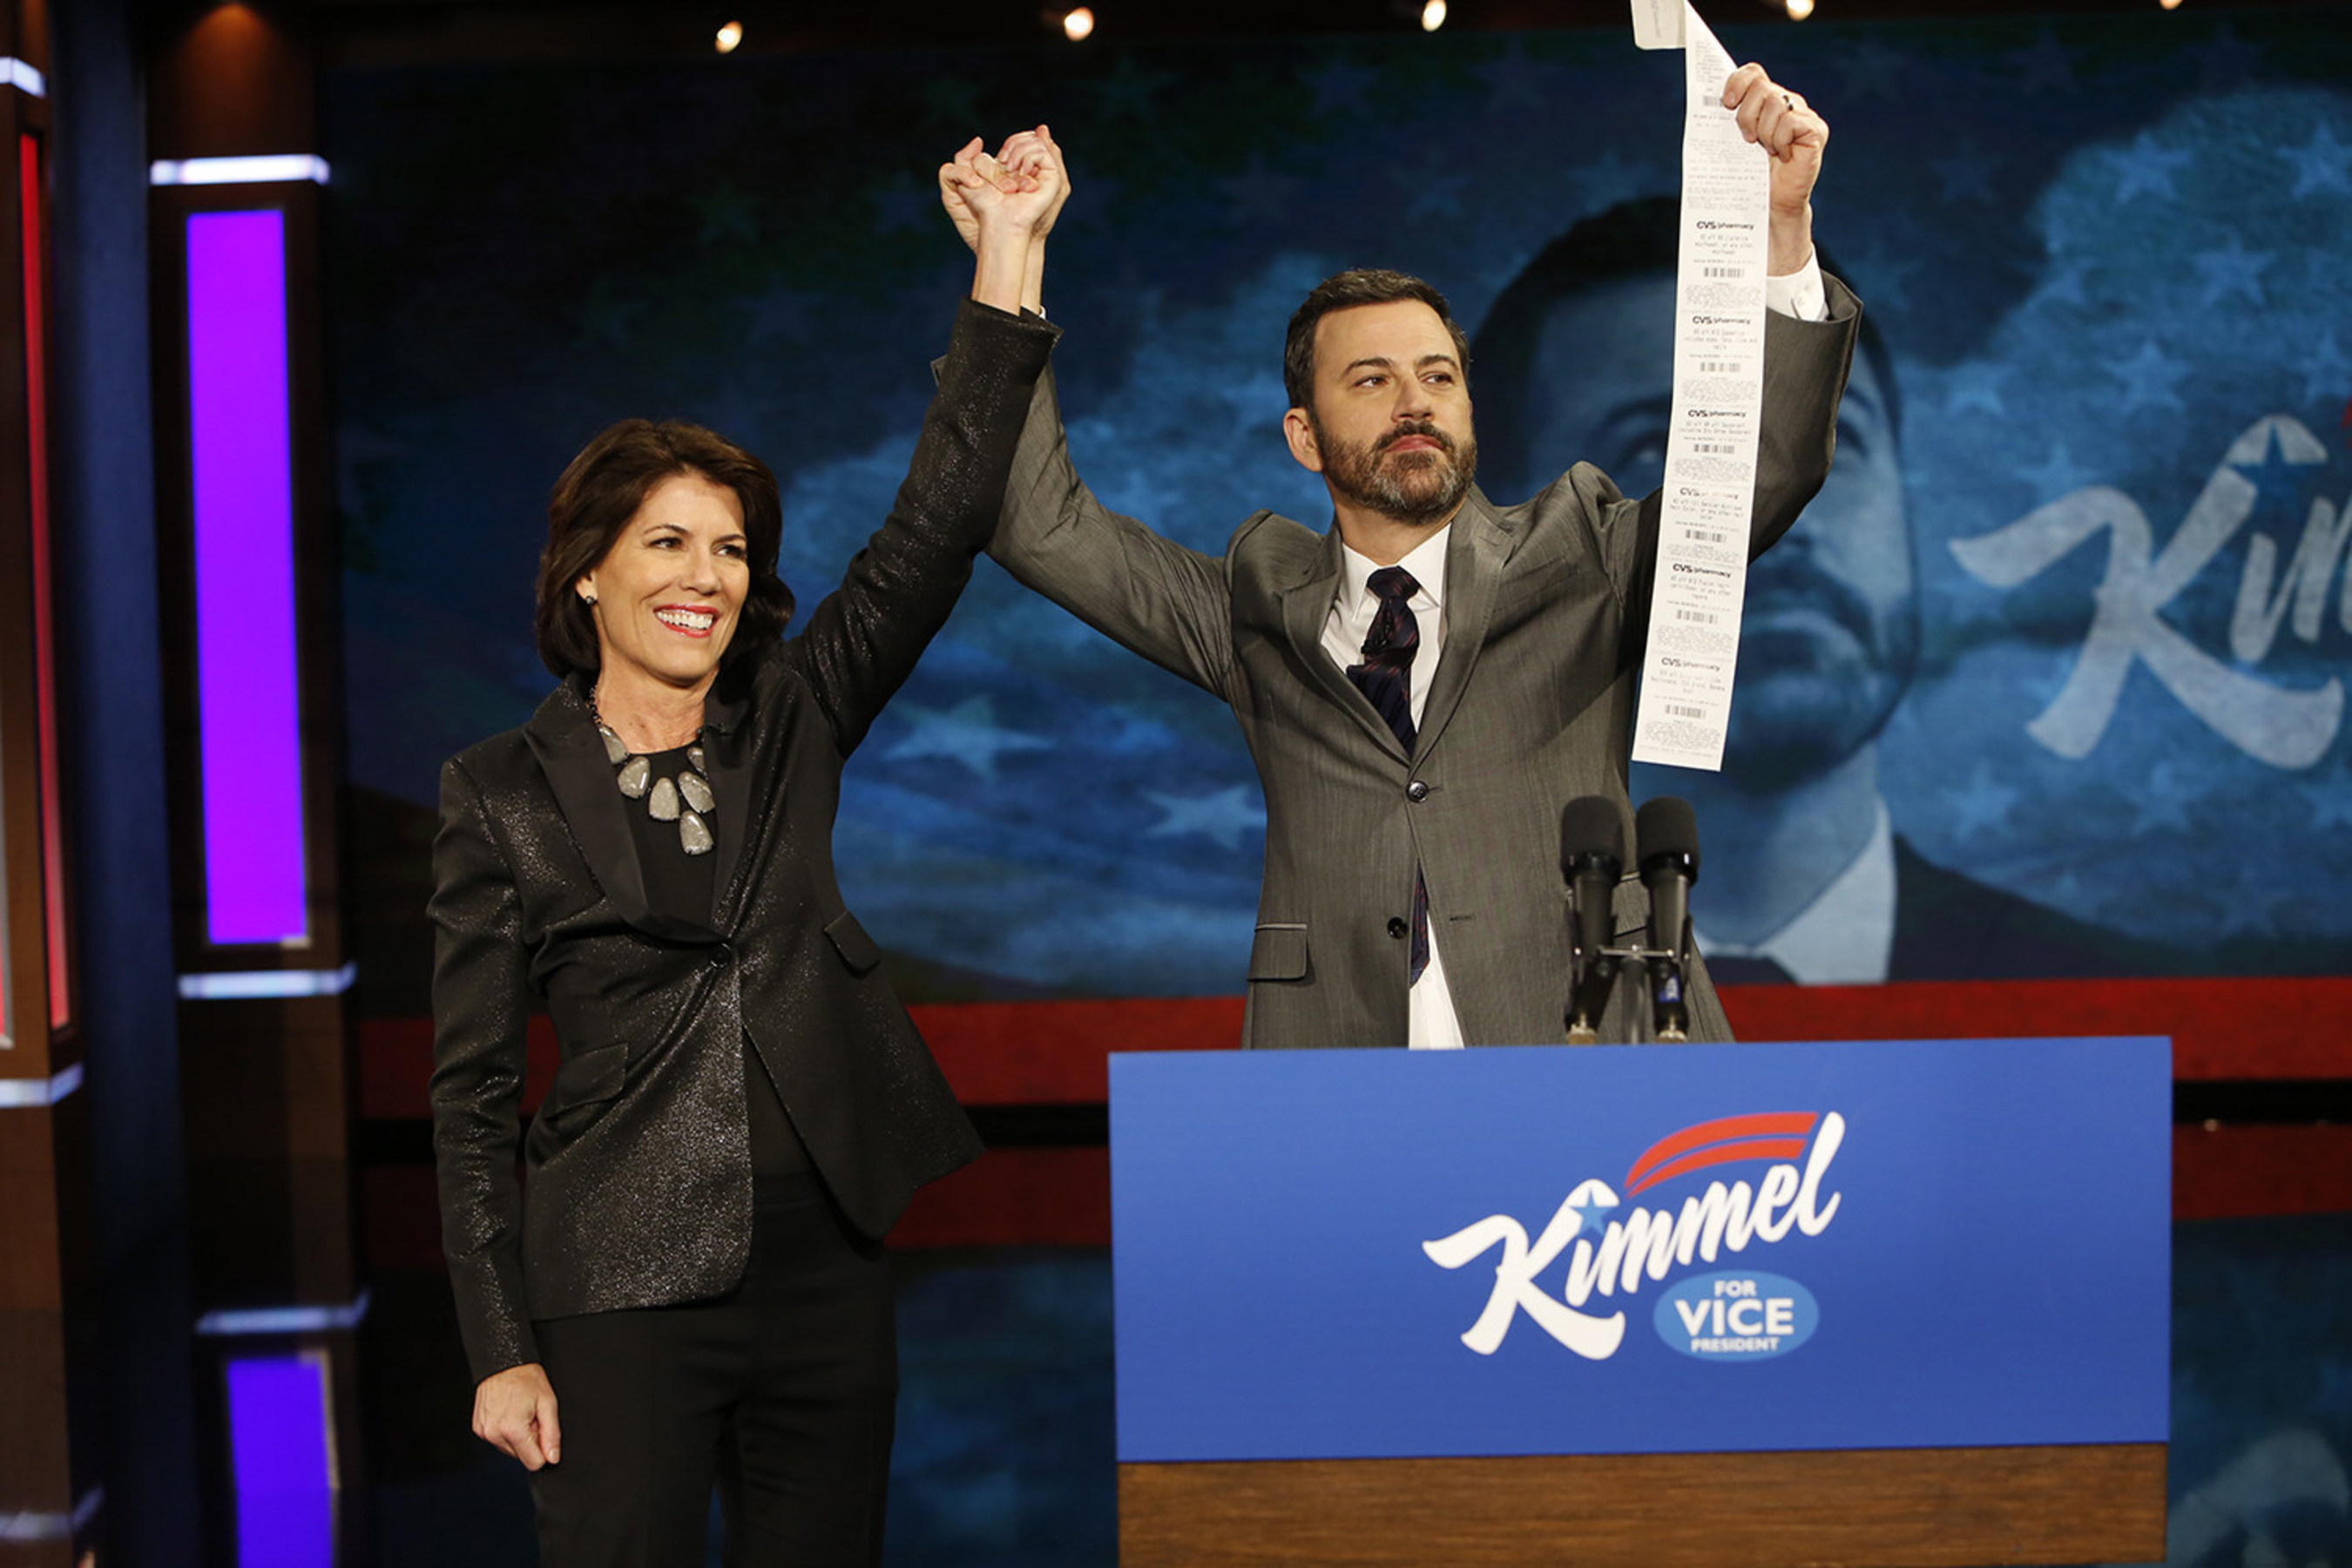 CVS Pharmacy President Helena Foulkes unveiled digital receipts in a surprise appearance on ABC's Jimmy Kimmel Live on Friday evening.